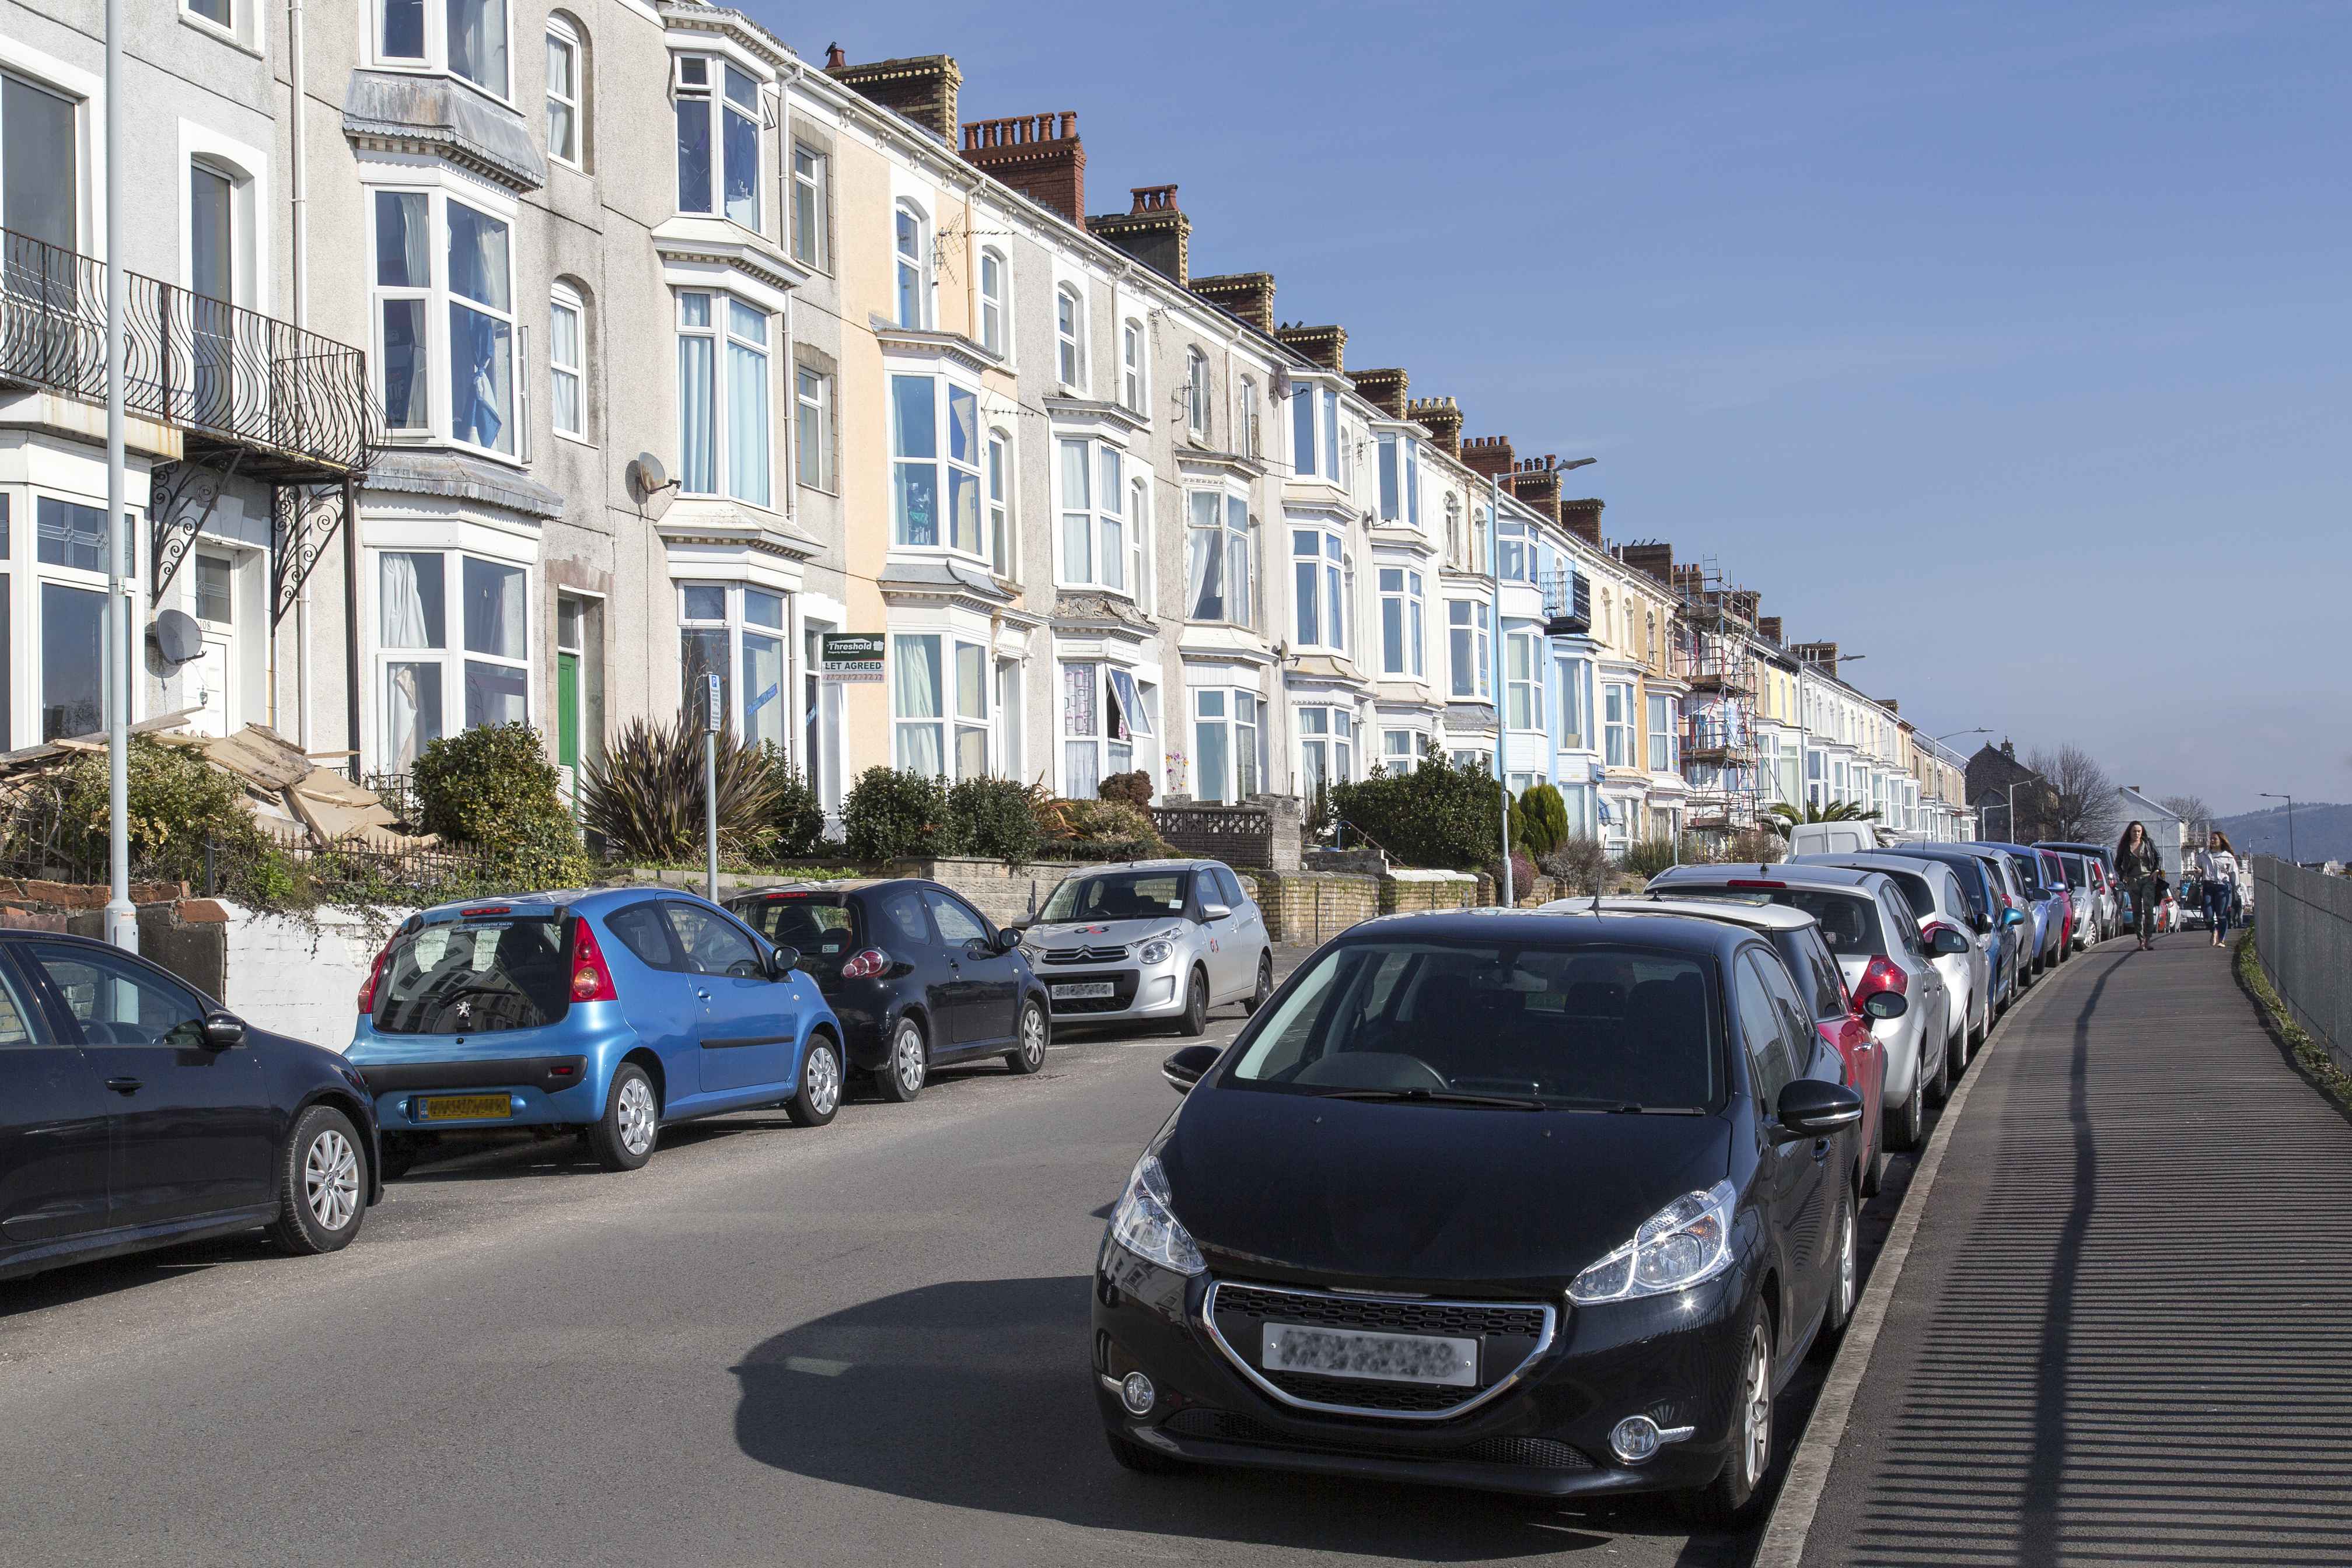 terraced houses in Swansea with cars parked in the street